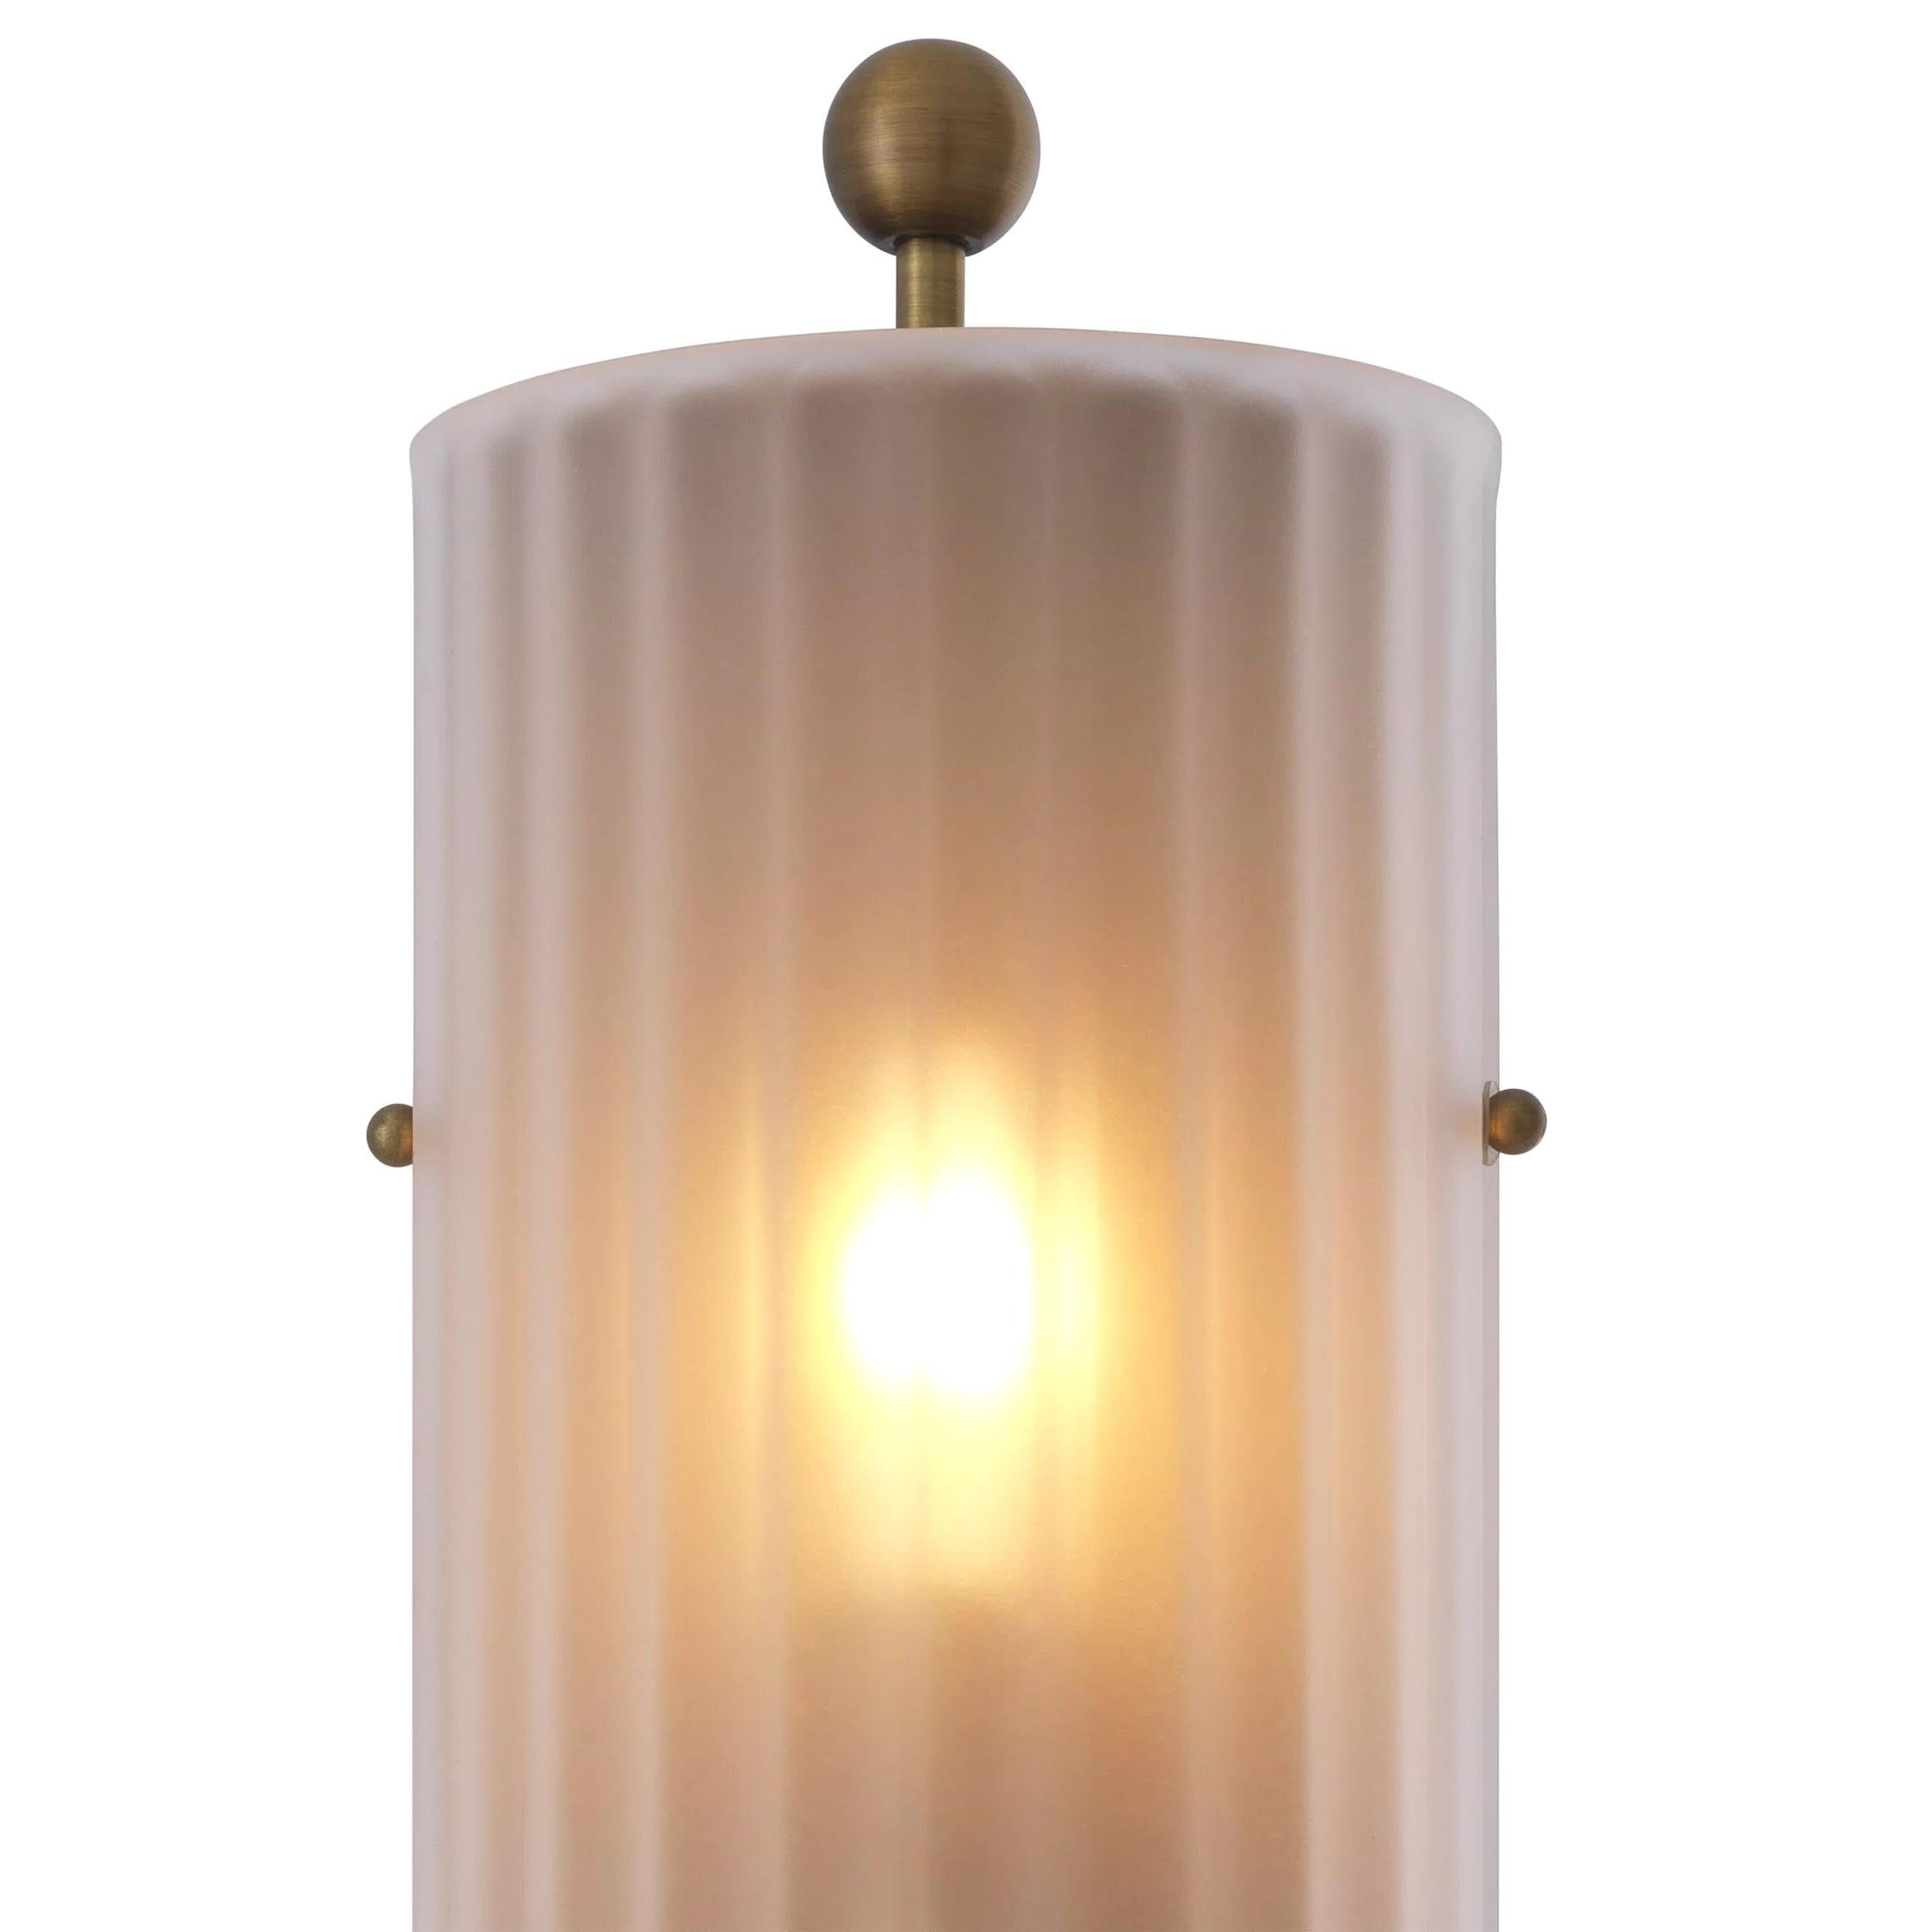 Art Deco Style Brass and glass curved wall light: elegant, presence and class all in transparency. 2 E14 light bulbs required. New item, never used.